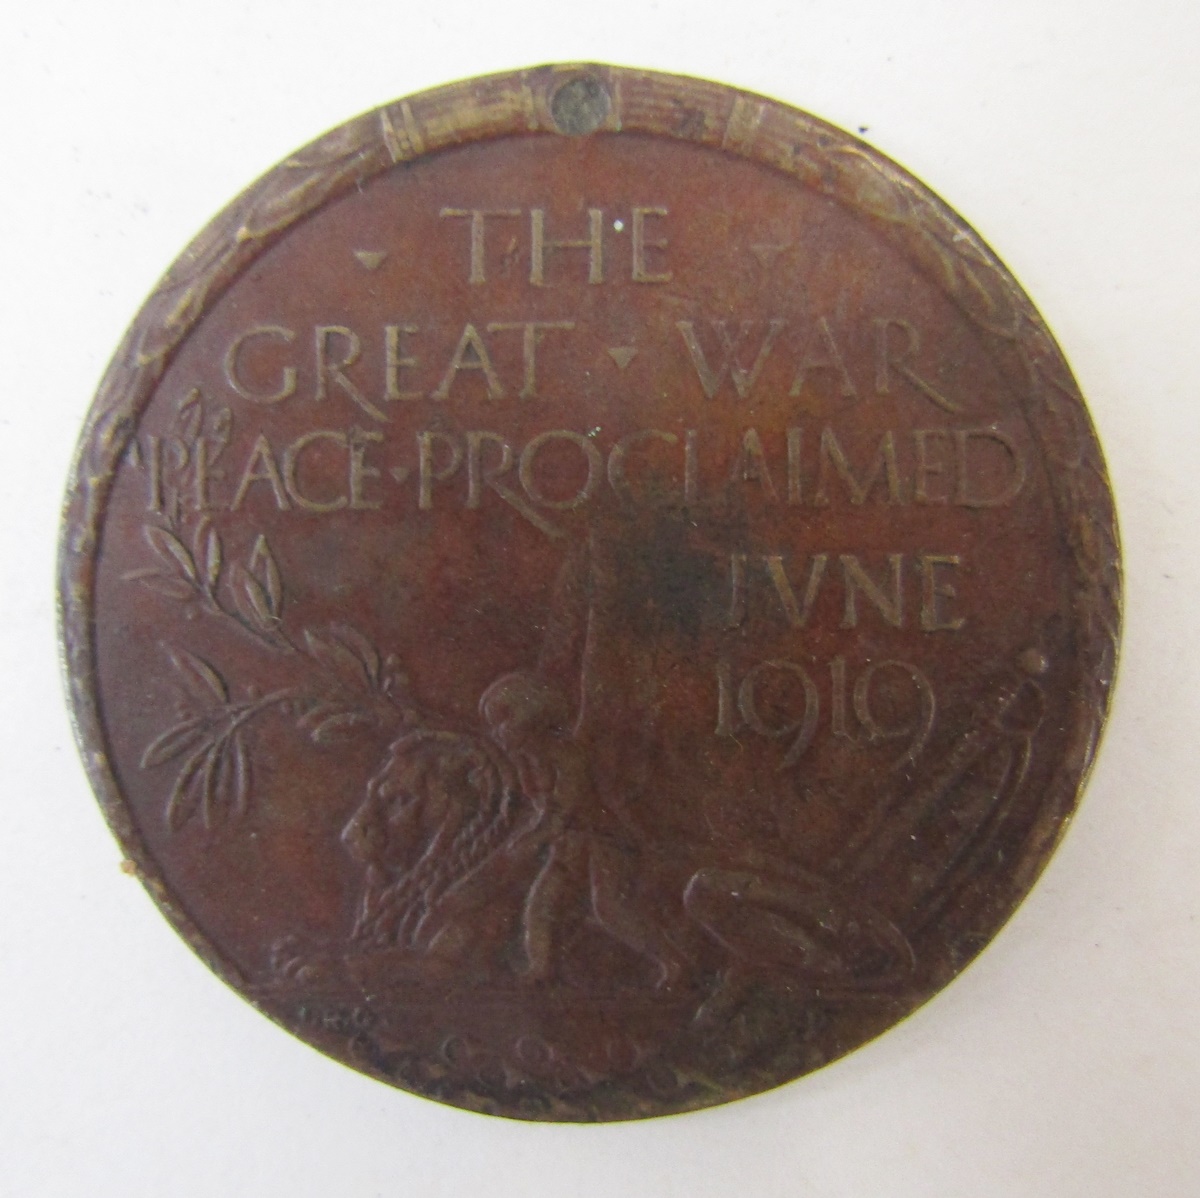 Four WWI victory medals with a Great War peace medal, fob and WWI ribbon bar, medals named to '2305. - Image 7 of 7